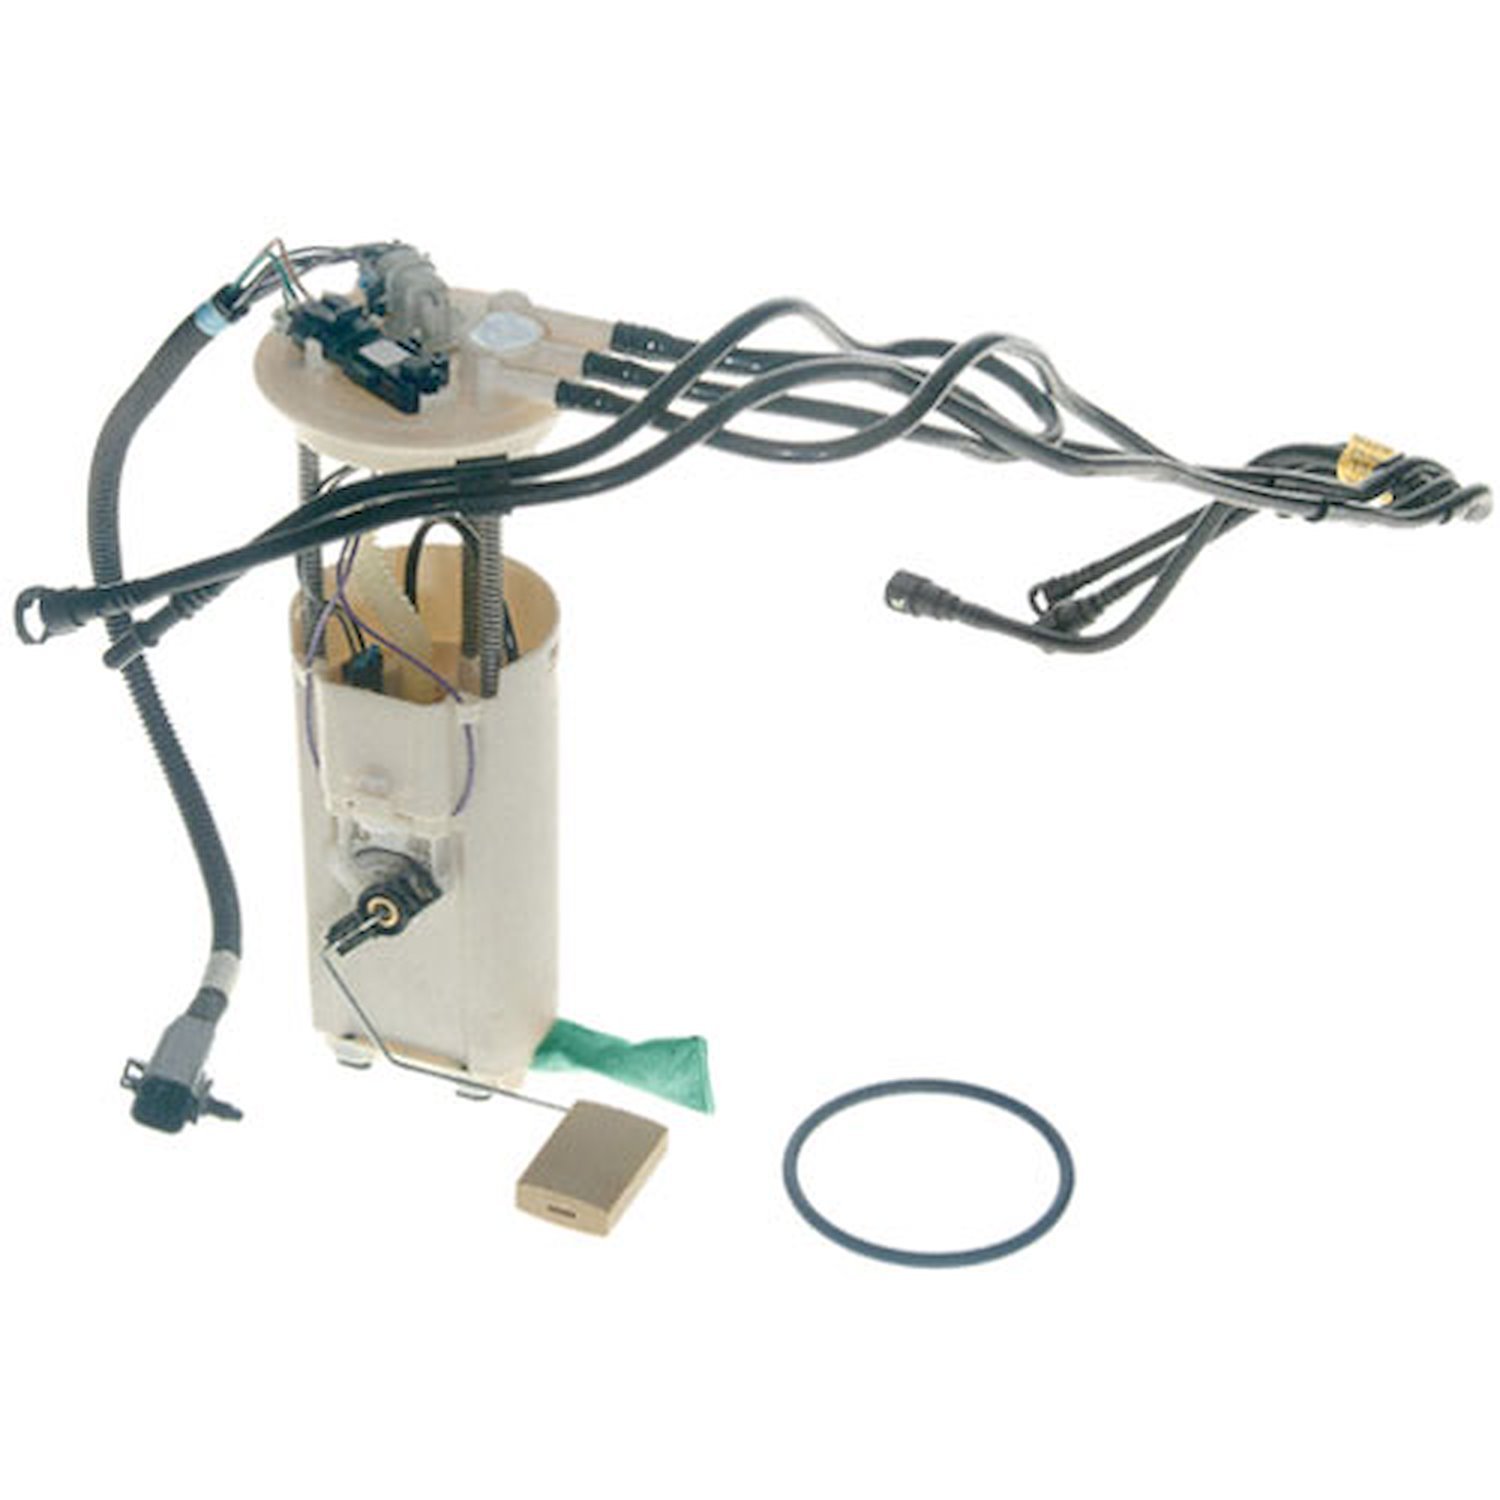 OE GM Replacement Electric Fuel Pump Module Assembly 1997-99 Chevrolet Lumina/Monte Carlo 3.1L V6